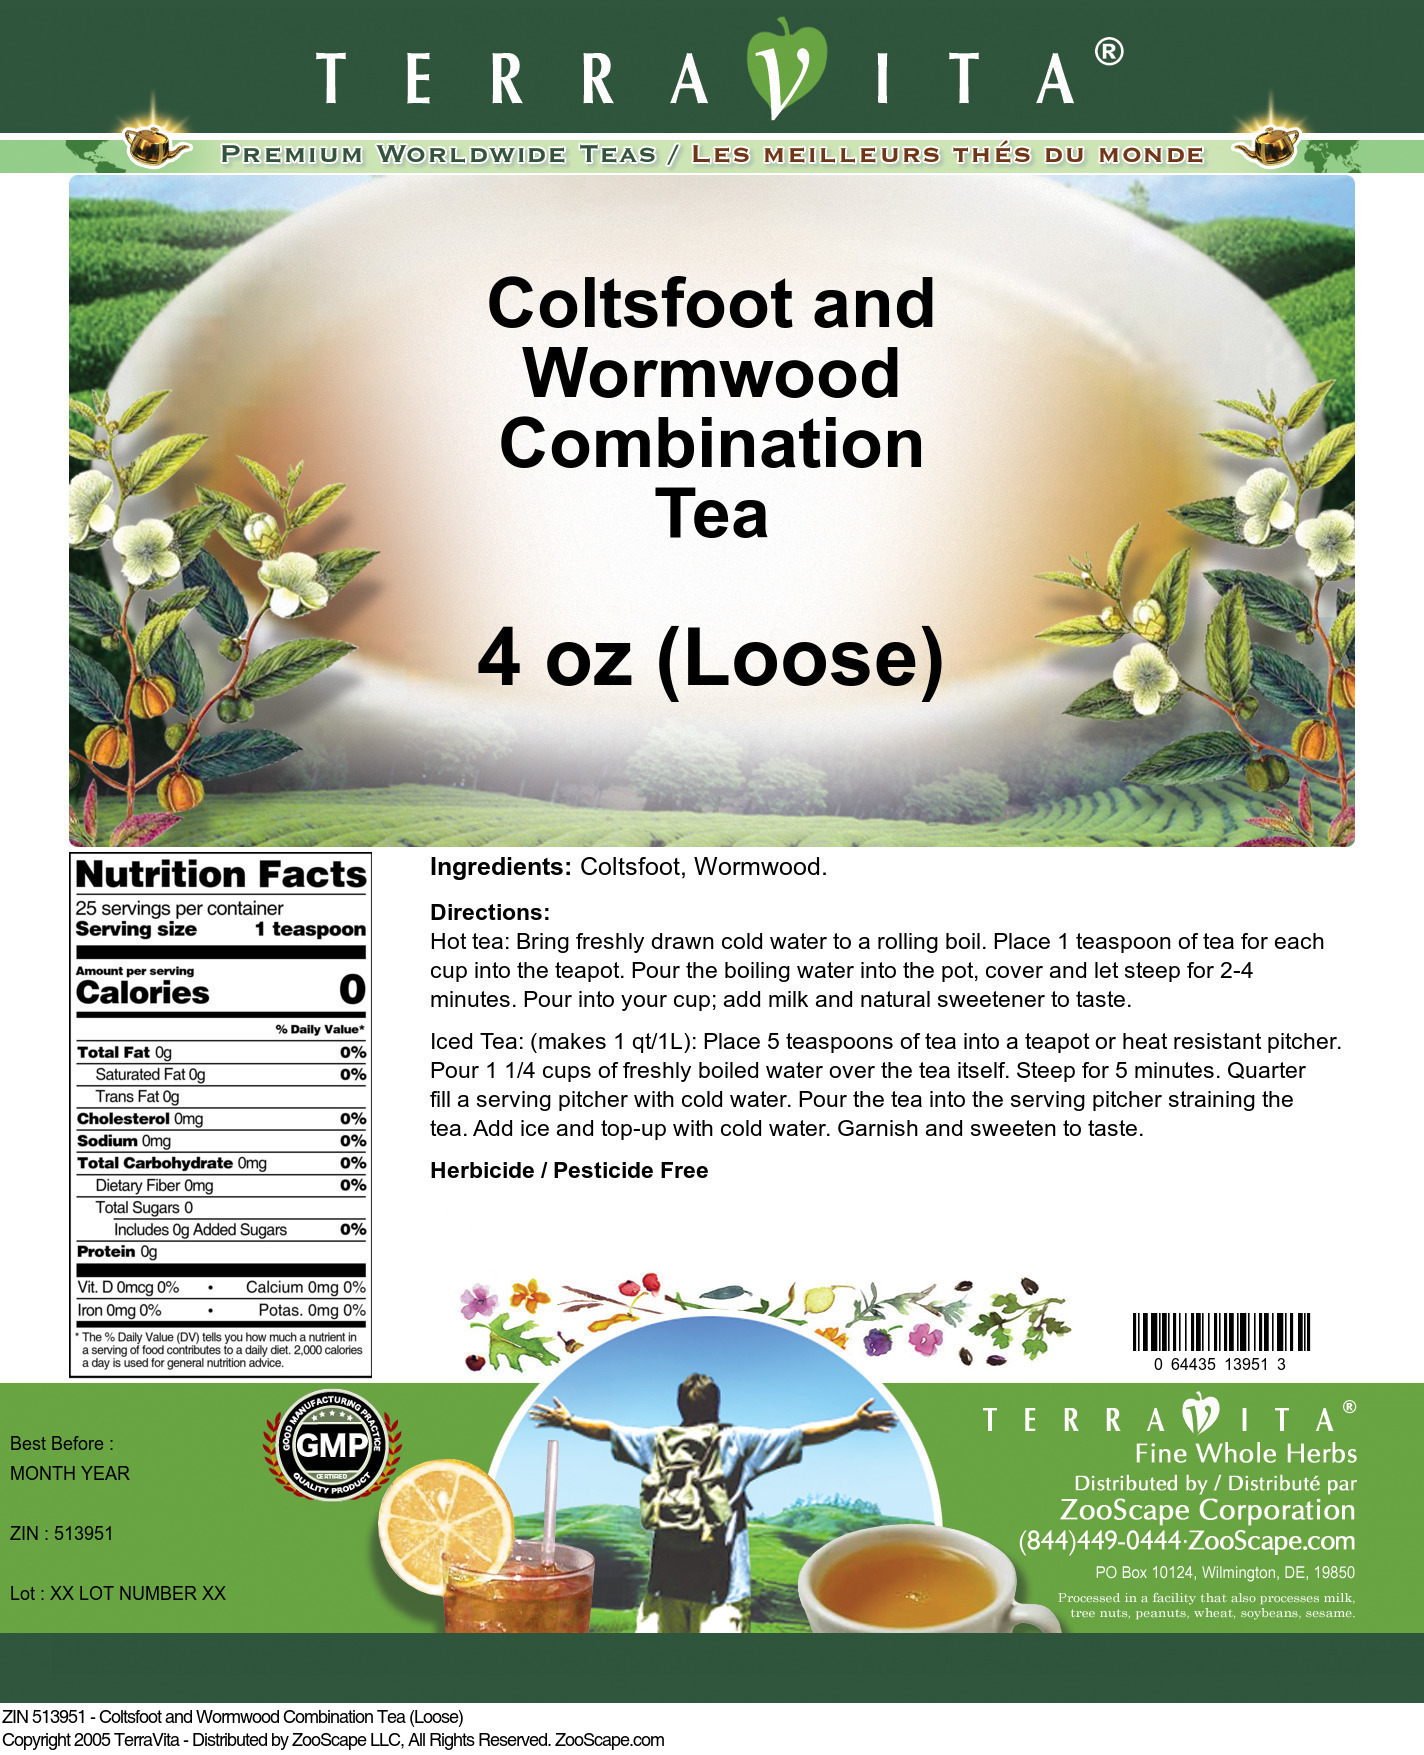 Coltsfoot and Wormwood Combination Tea (Loose) - Label